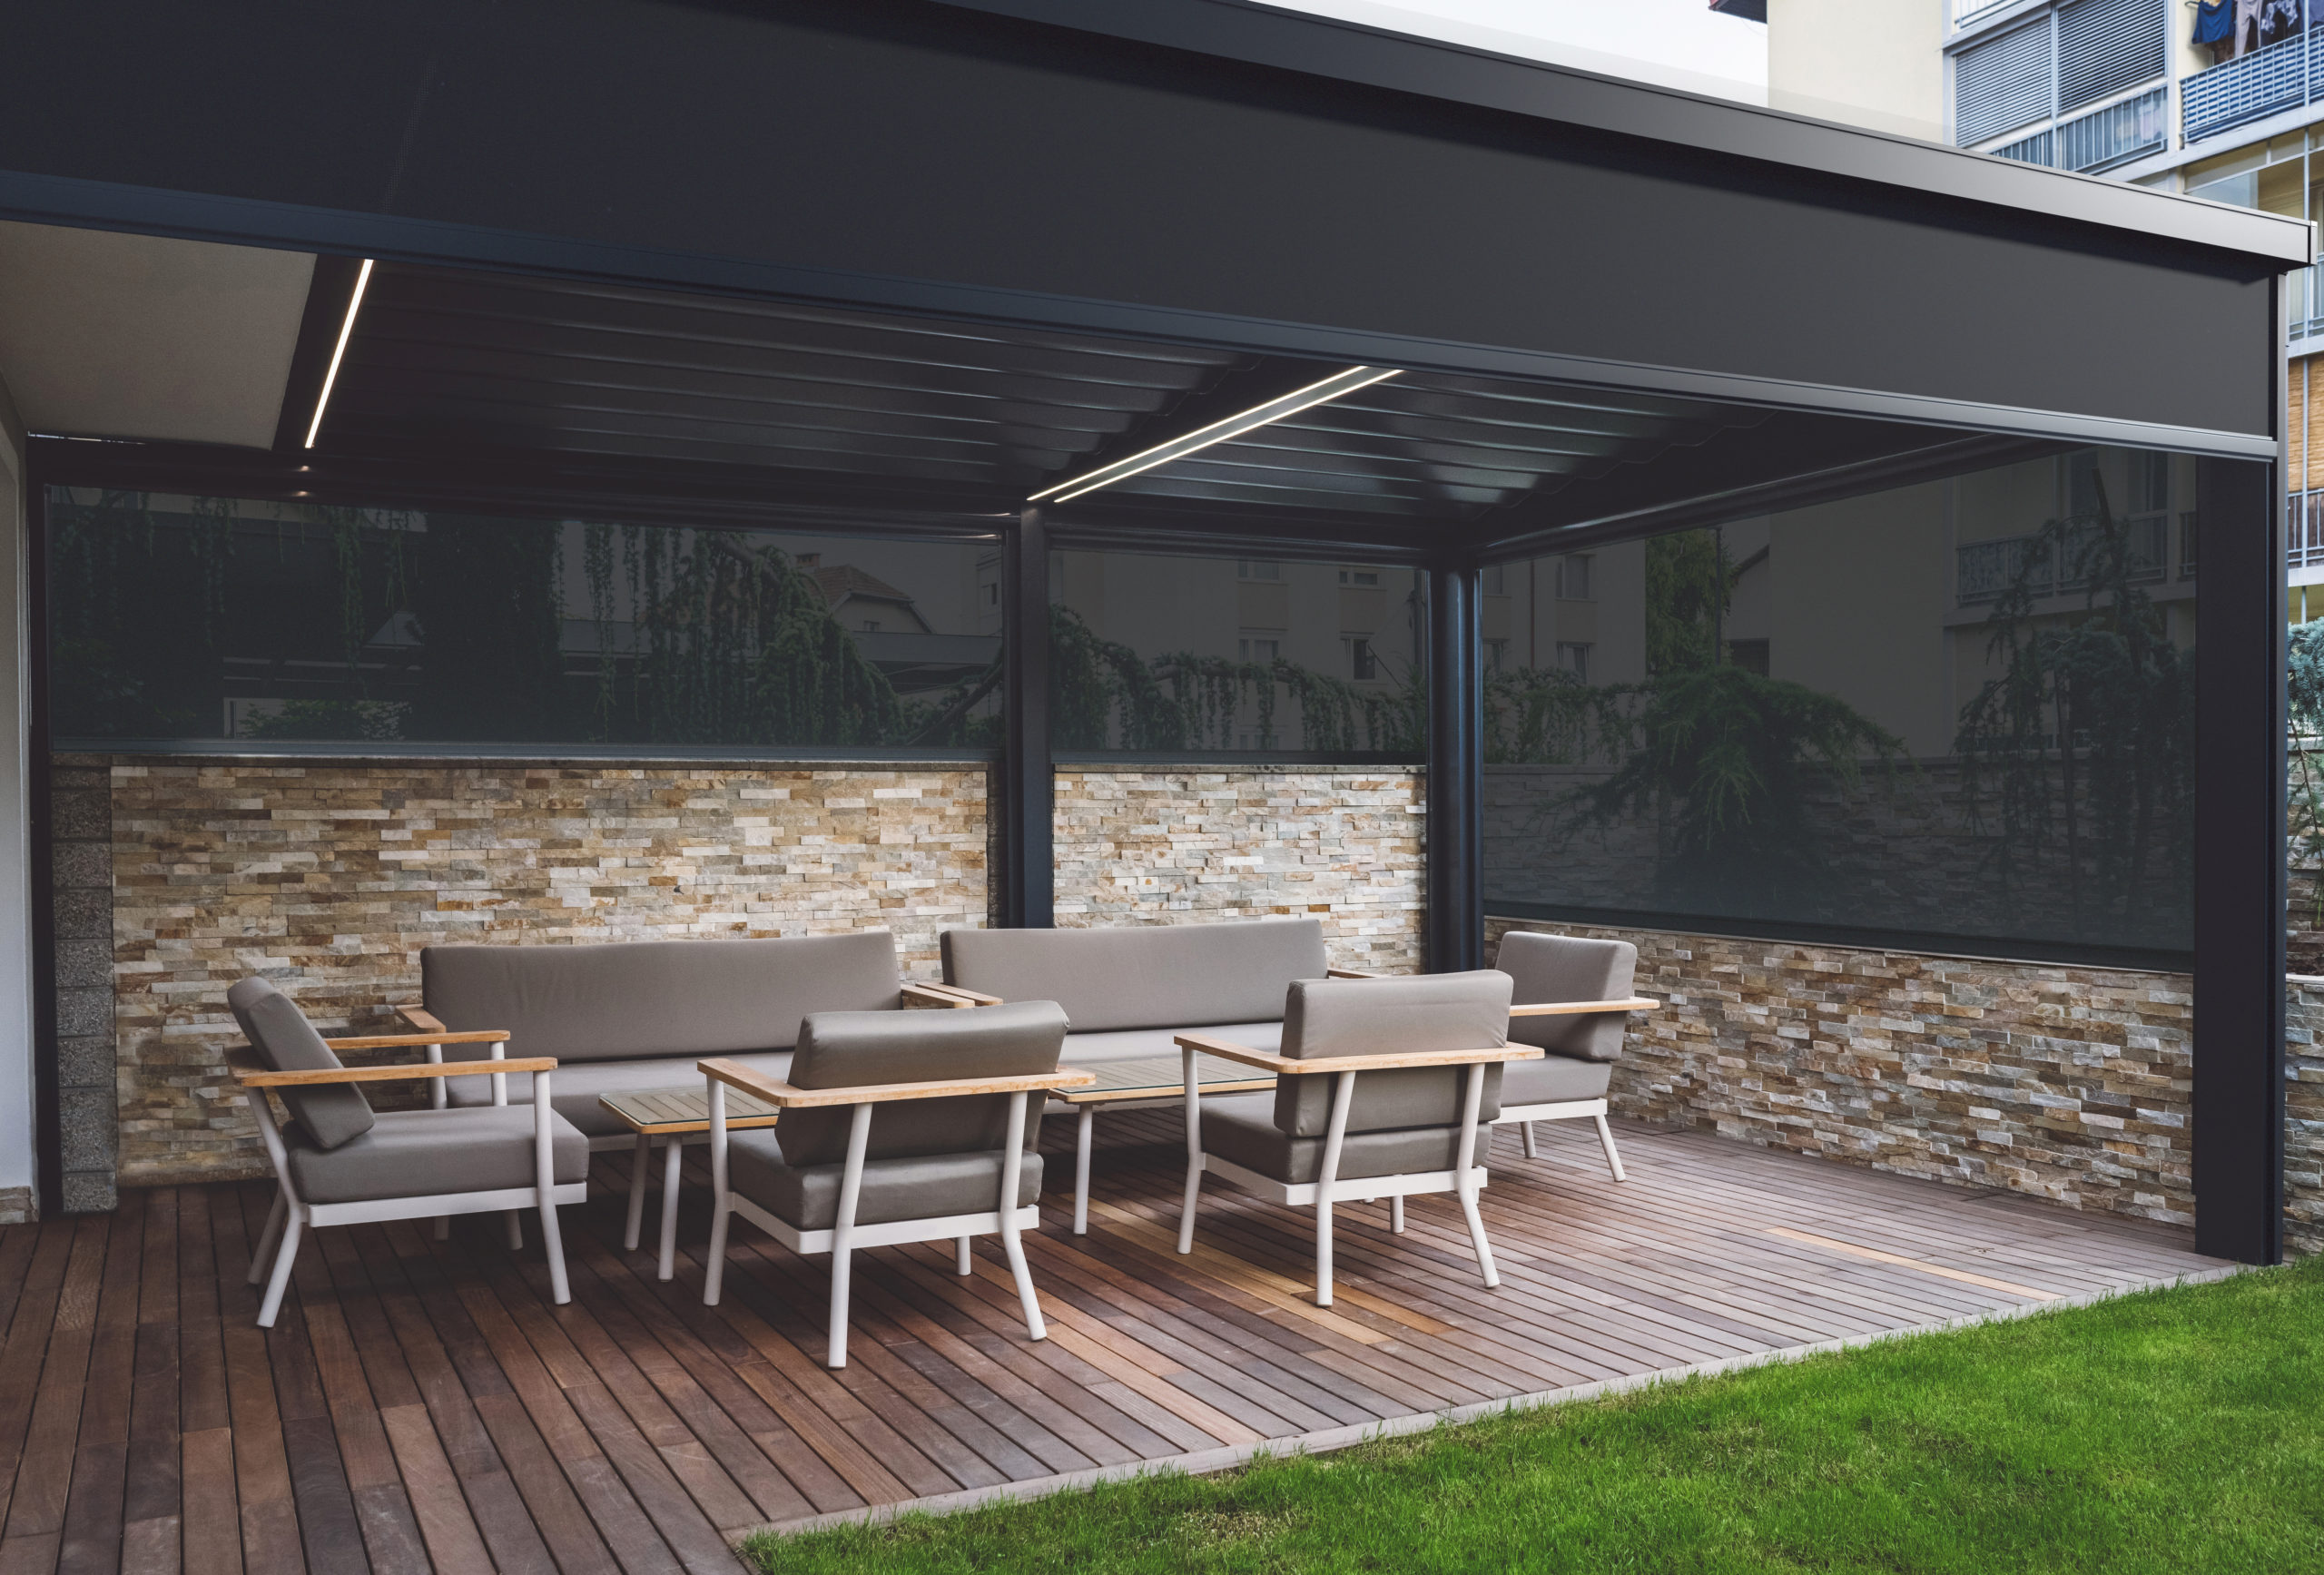 black exterior shades in outdoor seating area